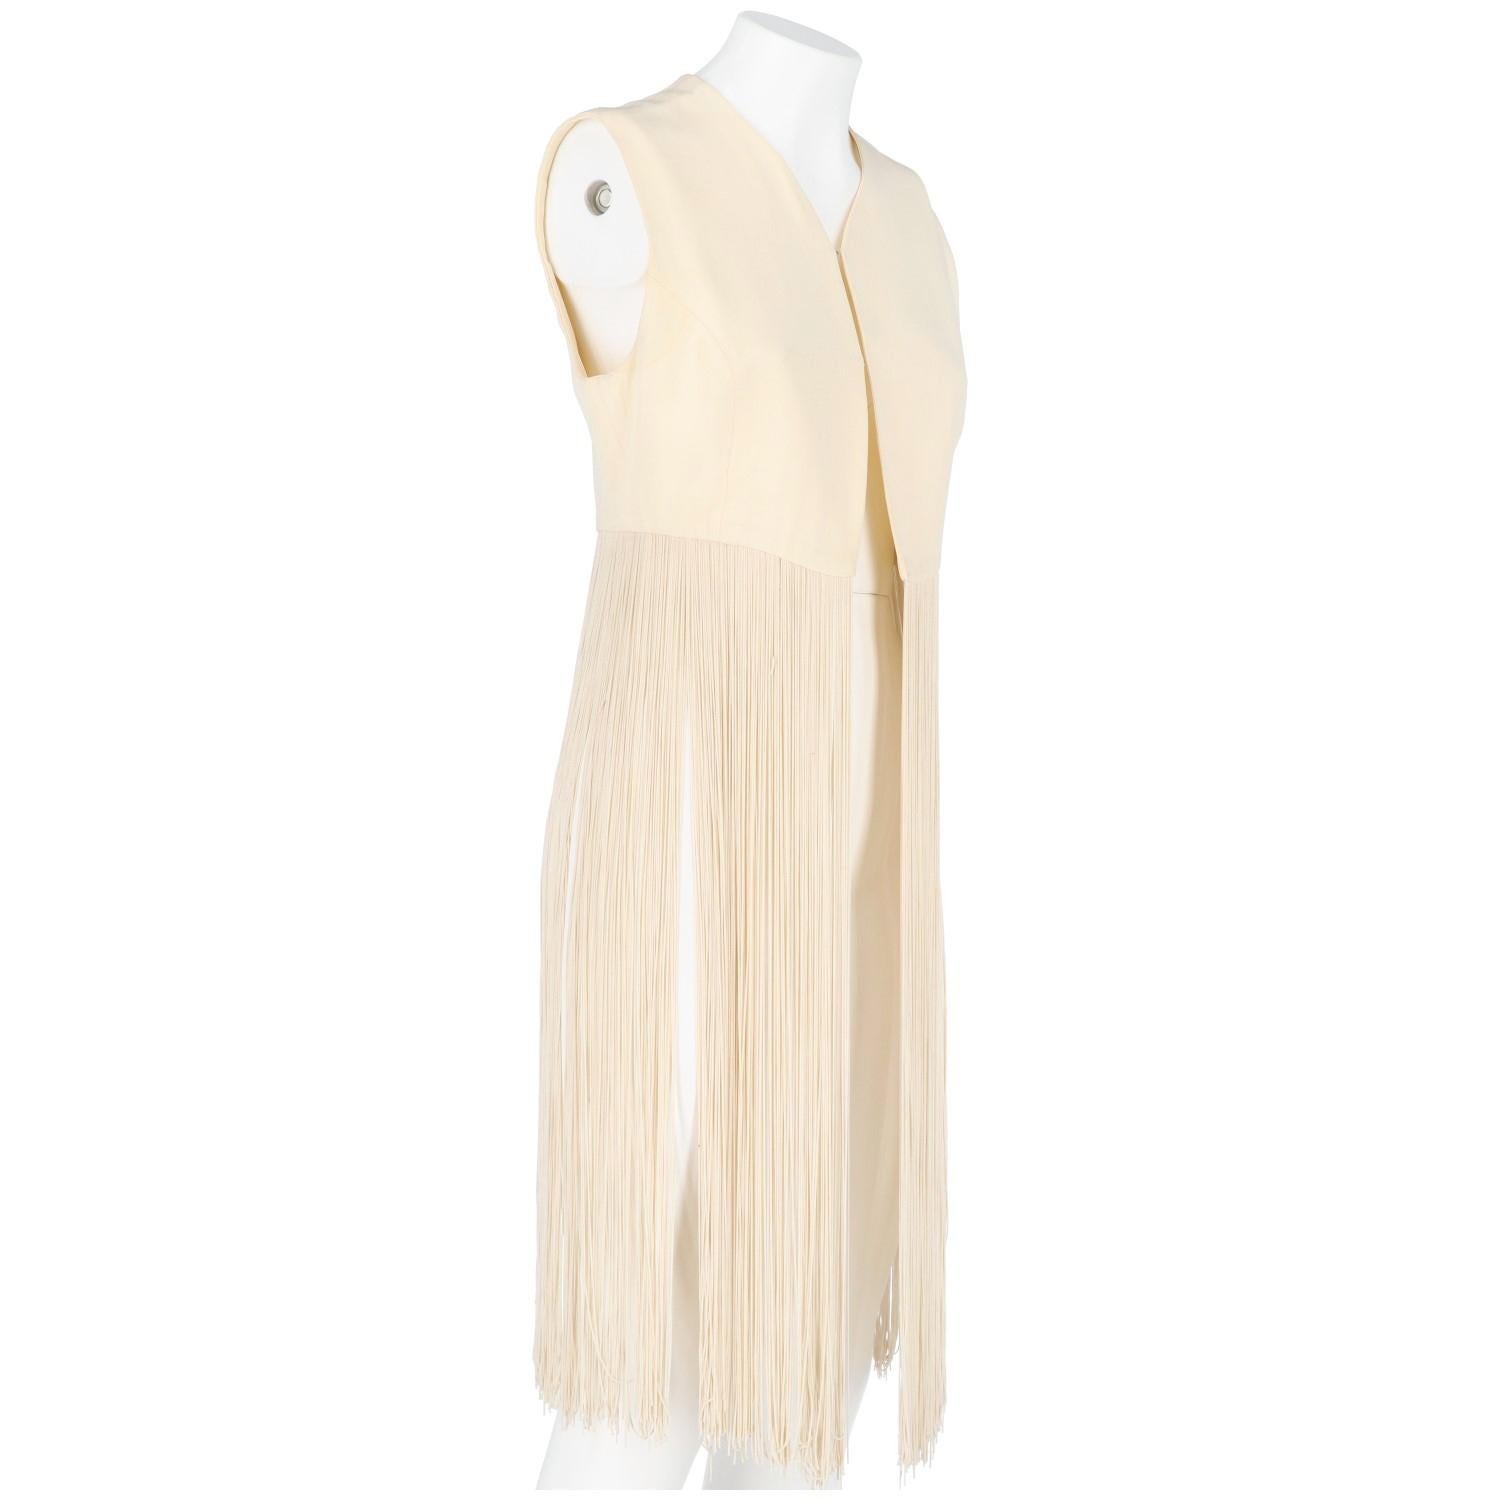 Dolce and Gabbana ivory vest with fringes, front closure with two hooks.

Years: 1990s

Made in Italy

Size: 42 IT

Linear measures

Height: 103 cm
Bust: 45 cm